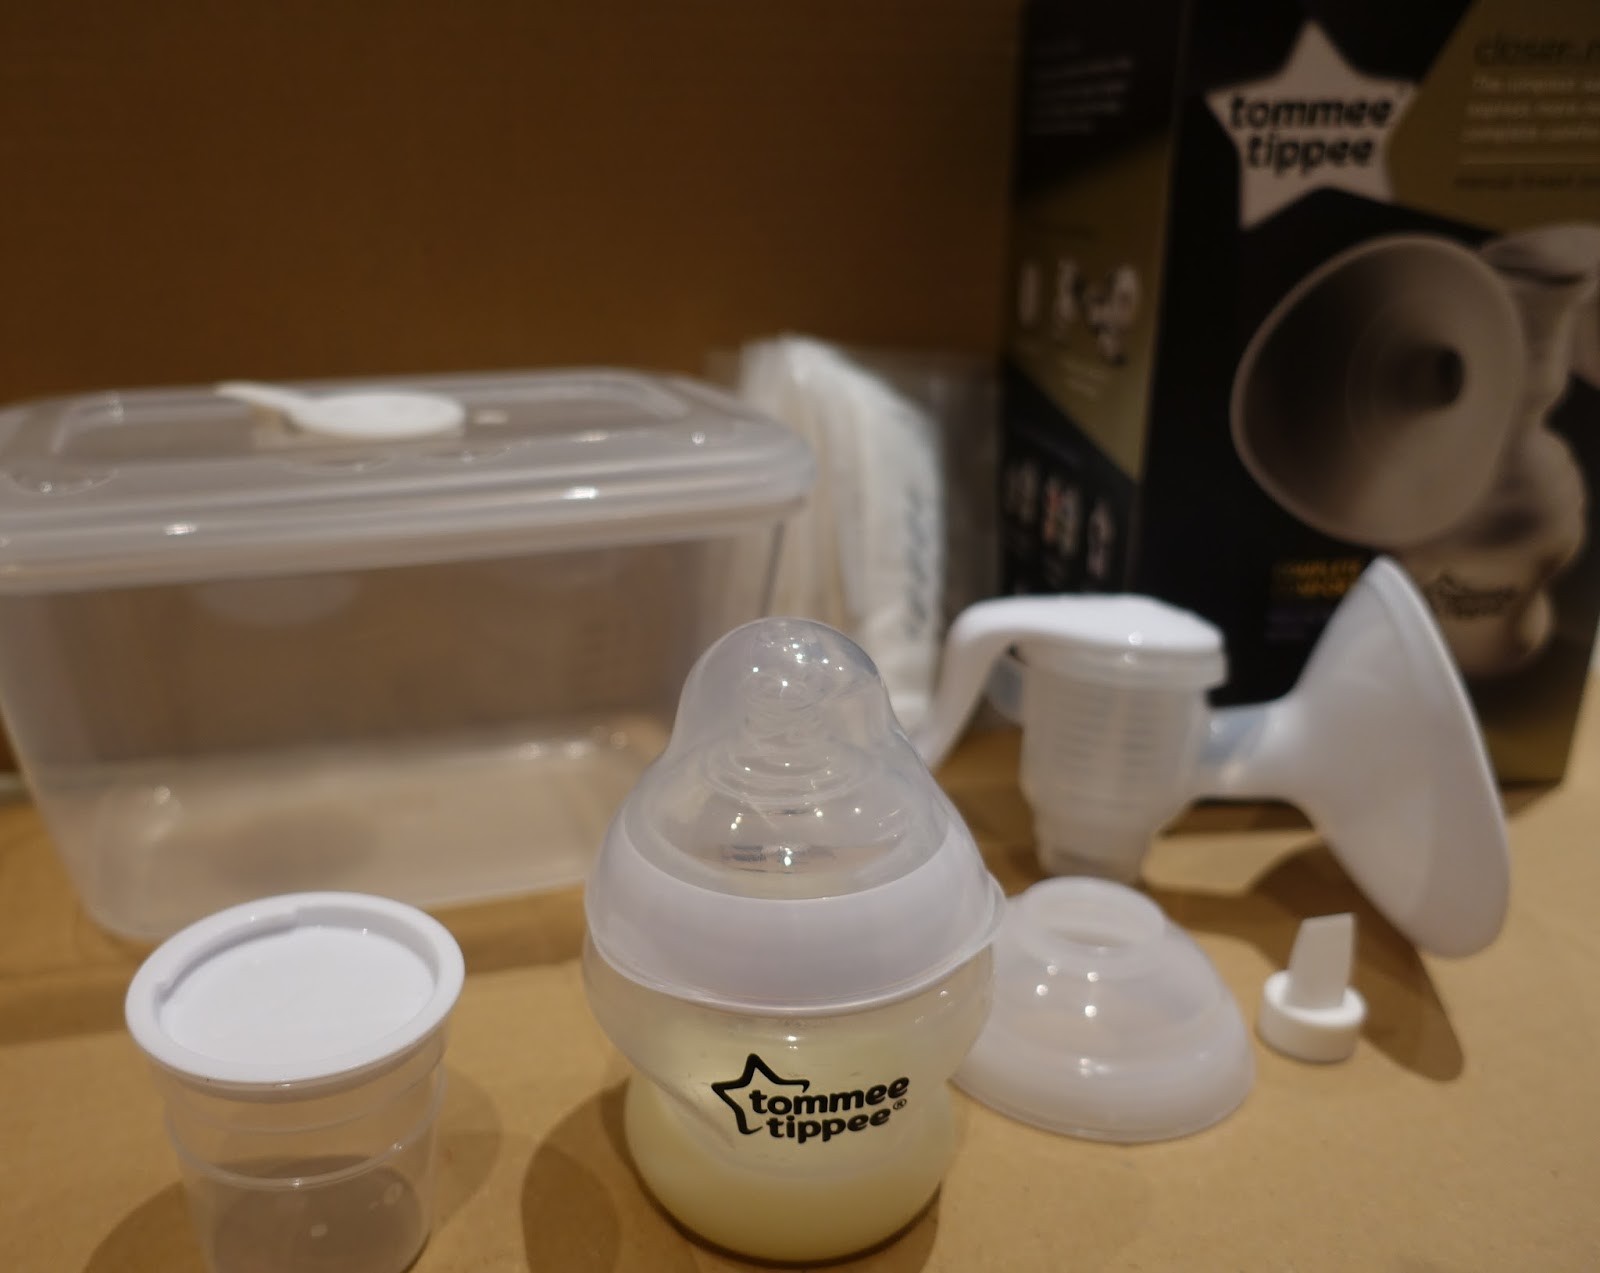 The Tommee Tippee manual breast pump box, the steriliser box, the pump parts, the closer to nature bottle (with breast milk in) , the milk storage pot and disposable breast pads